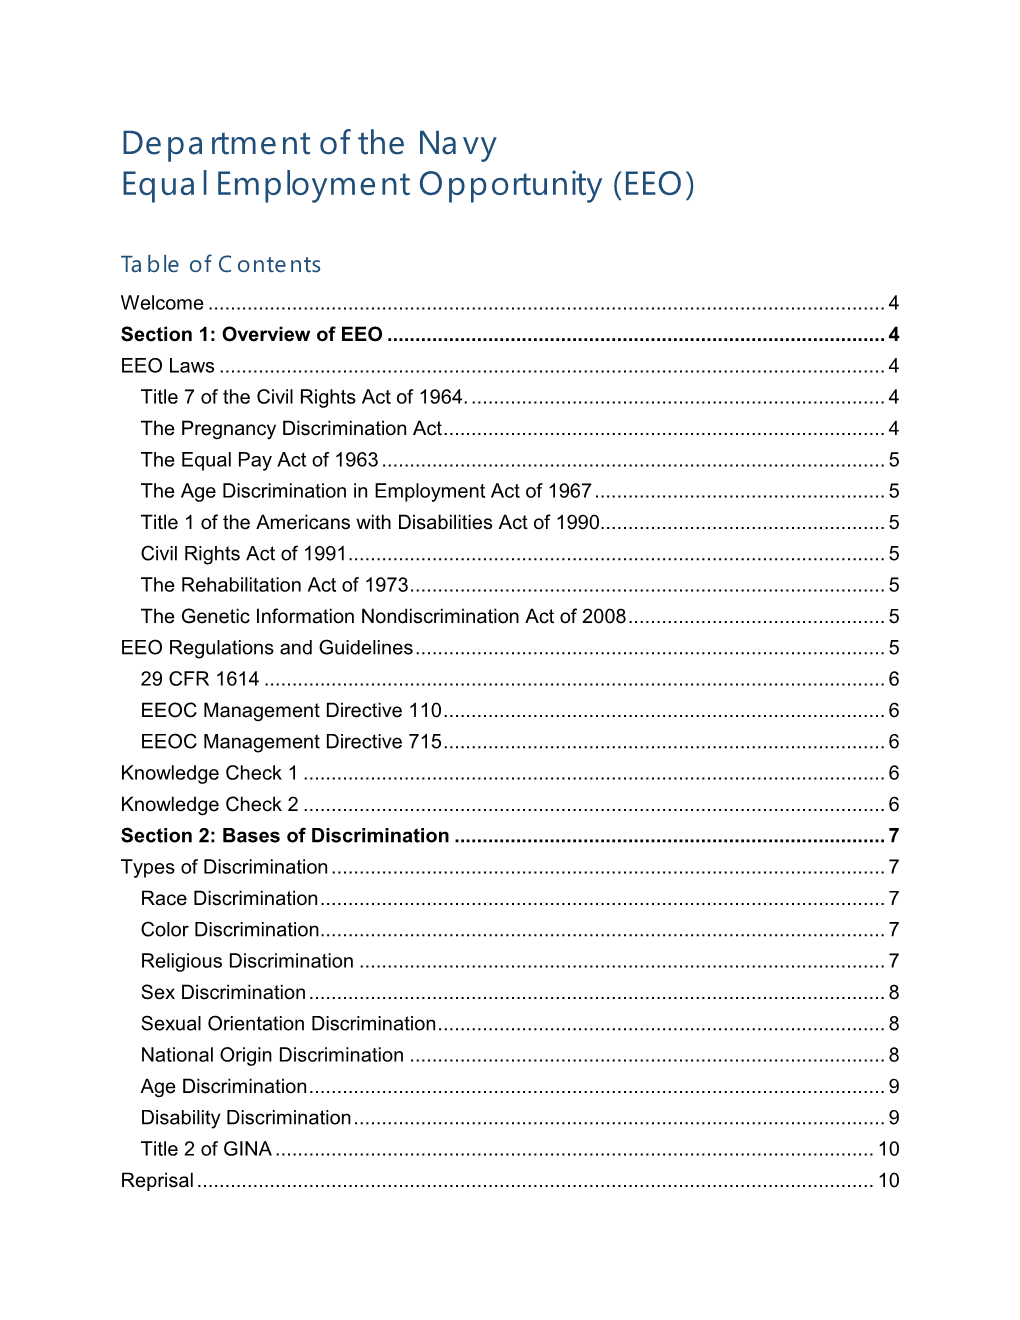 Department of the Navy Equal Employment Opportunity (EEO)